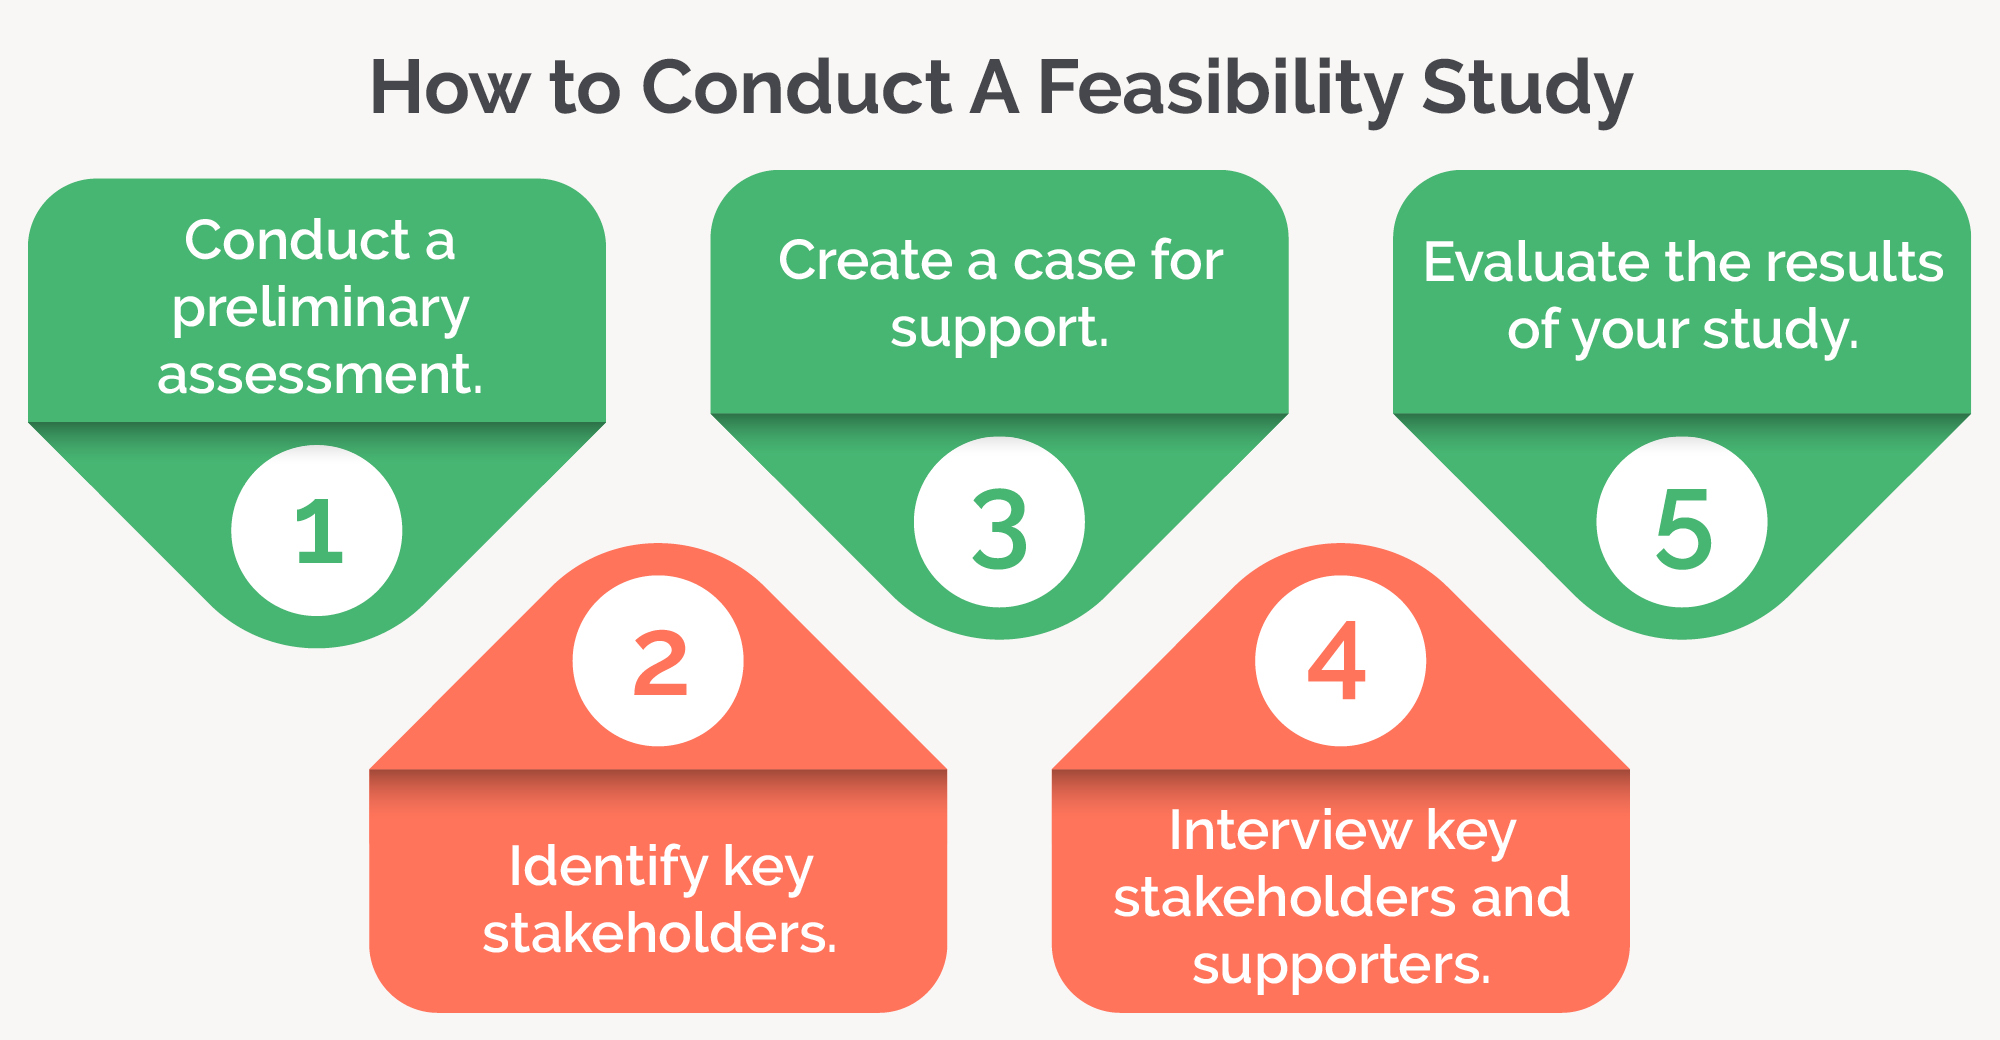 This image lists all the steps of conducting a feasibility study, which are explored in the text below.